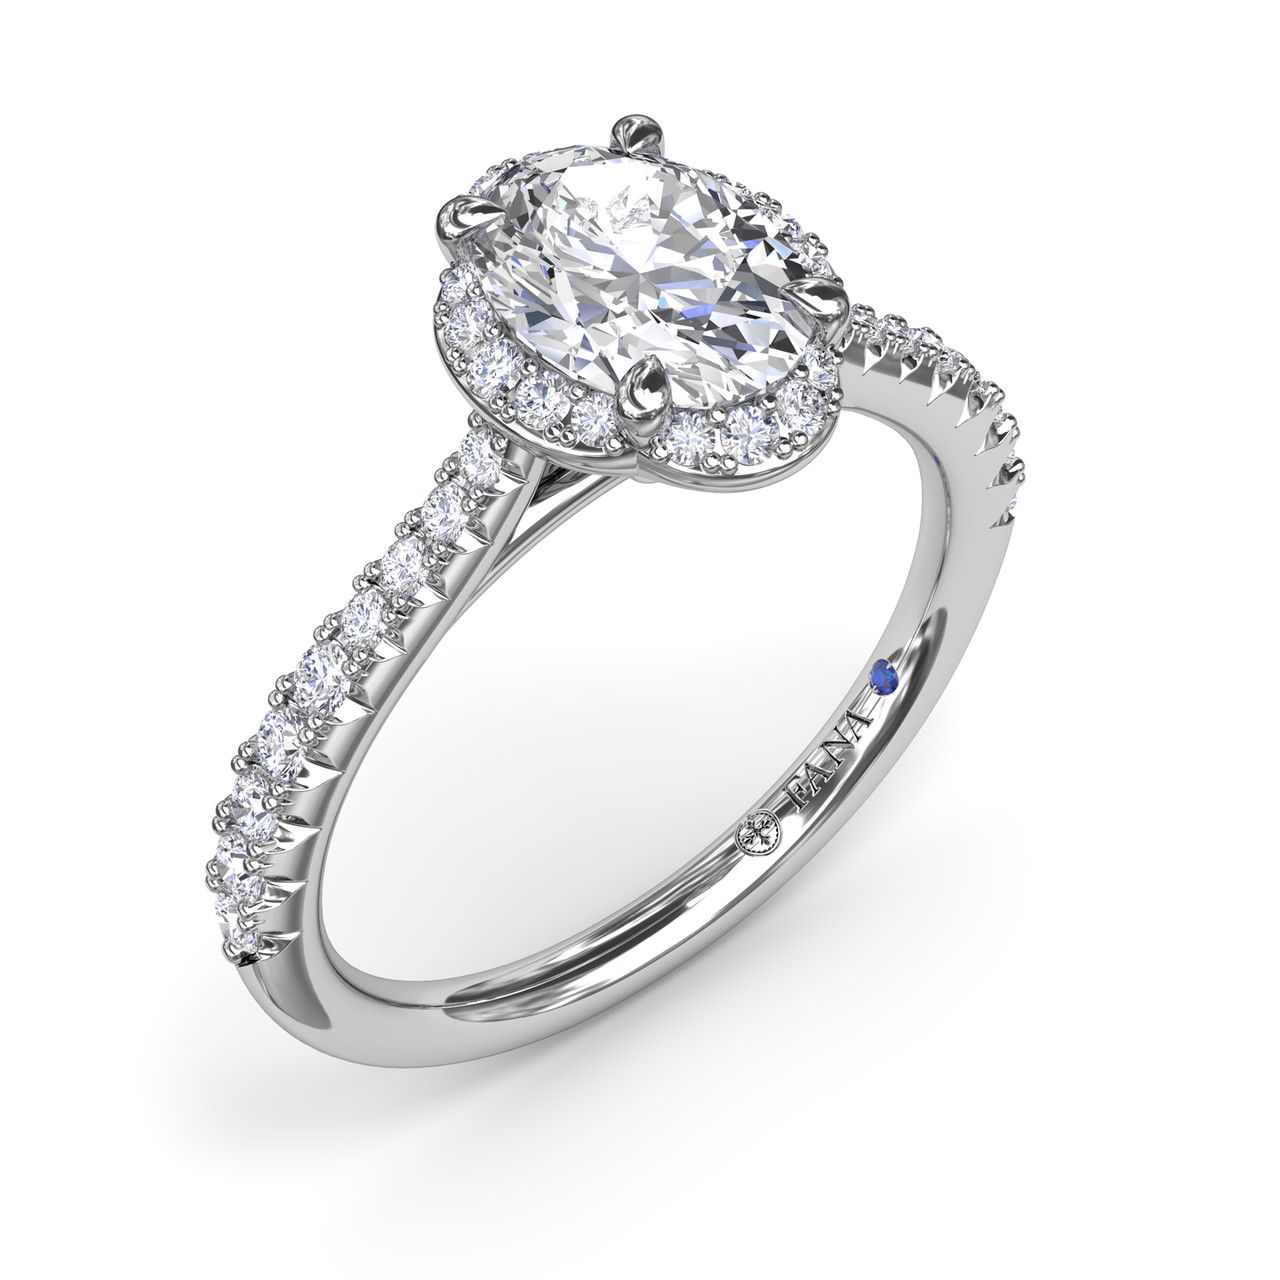 kortademigheid Chip ui 14K WHITE GOLD HALO SEMI-MOUNT RING SIZE 6.5 WITH 38=0.32TW ROUND G-H  VS2-SI1 DIAMONDS AND ONE ROUND BLUE SAPPHIRE (2.94 GRAMS) - 001-140-05383